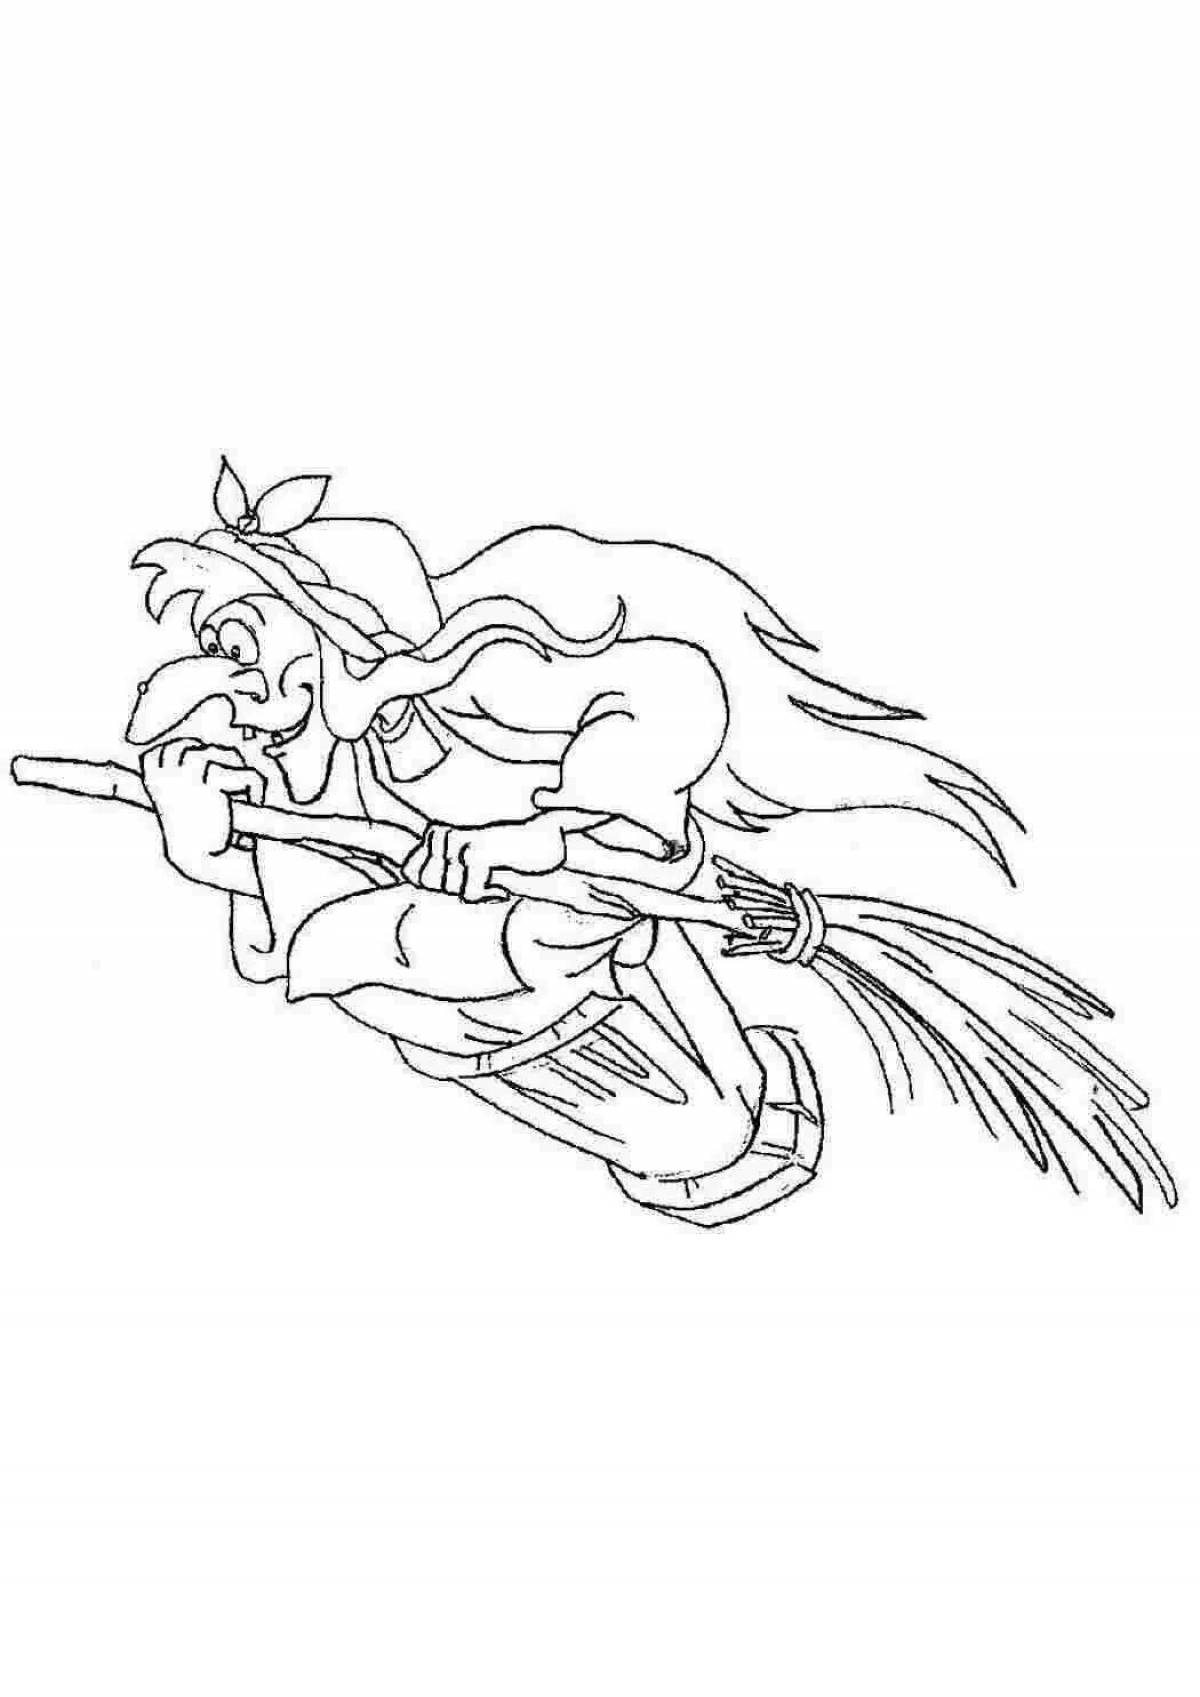 Wonderful baba yaga coloring pages for kids